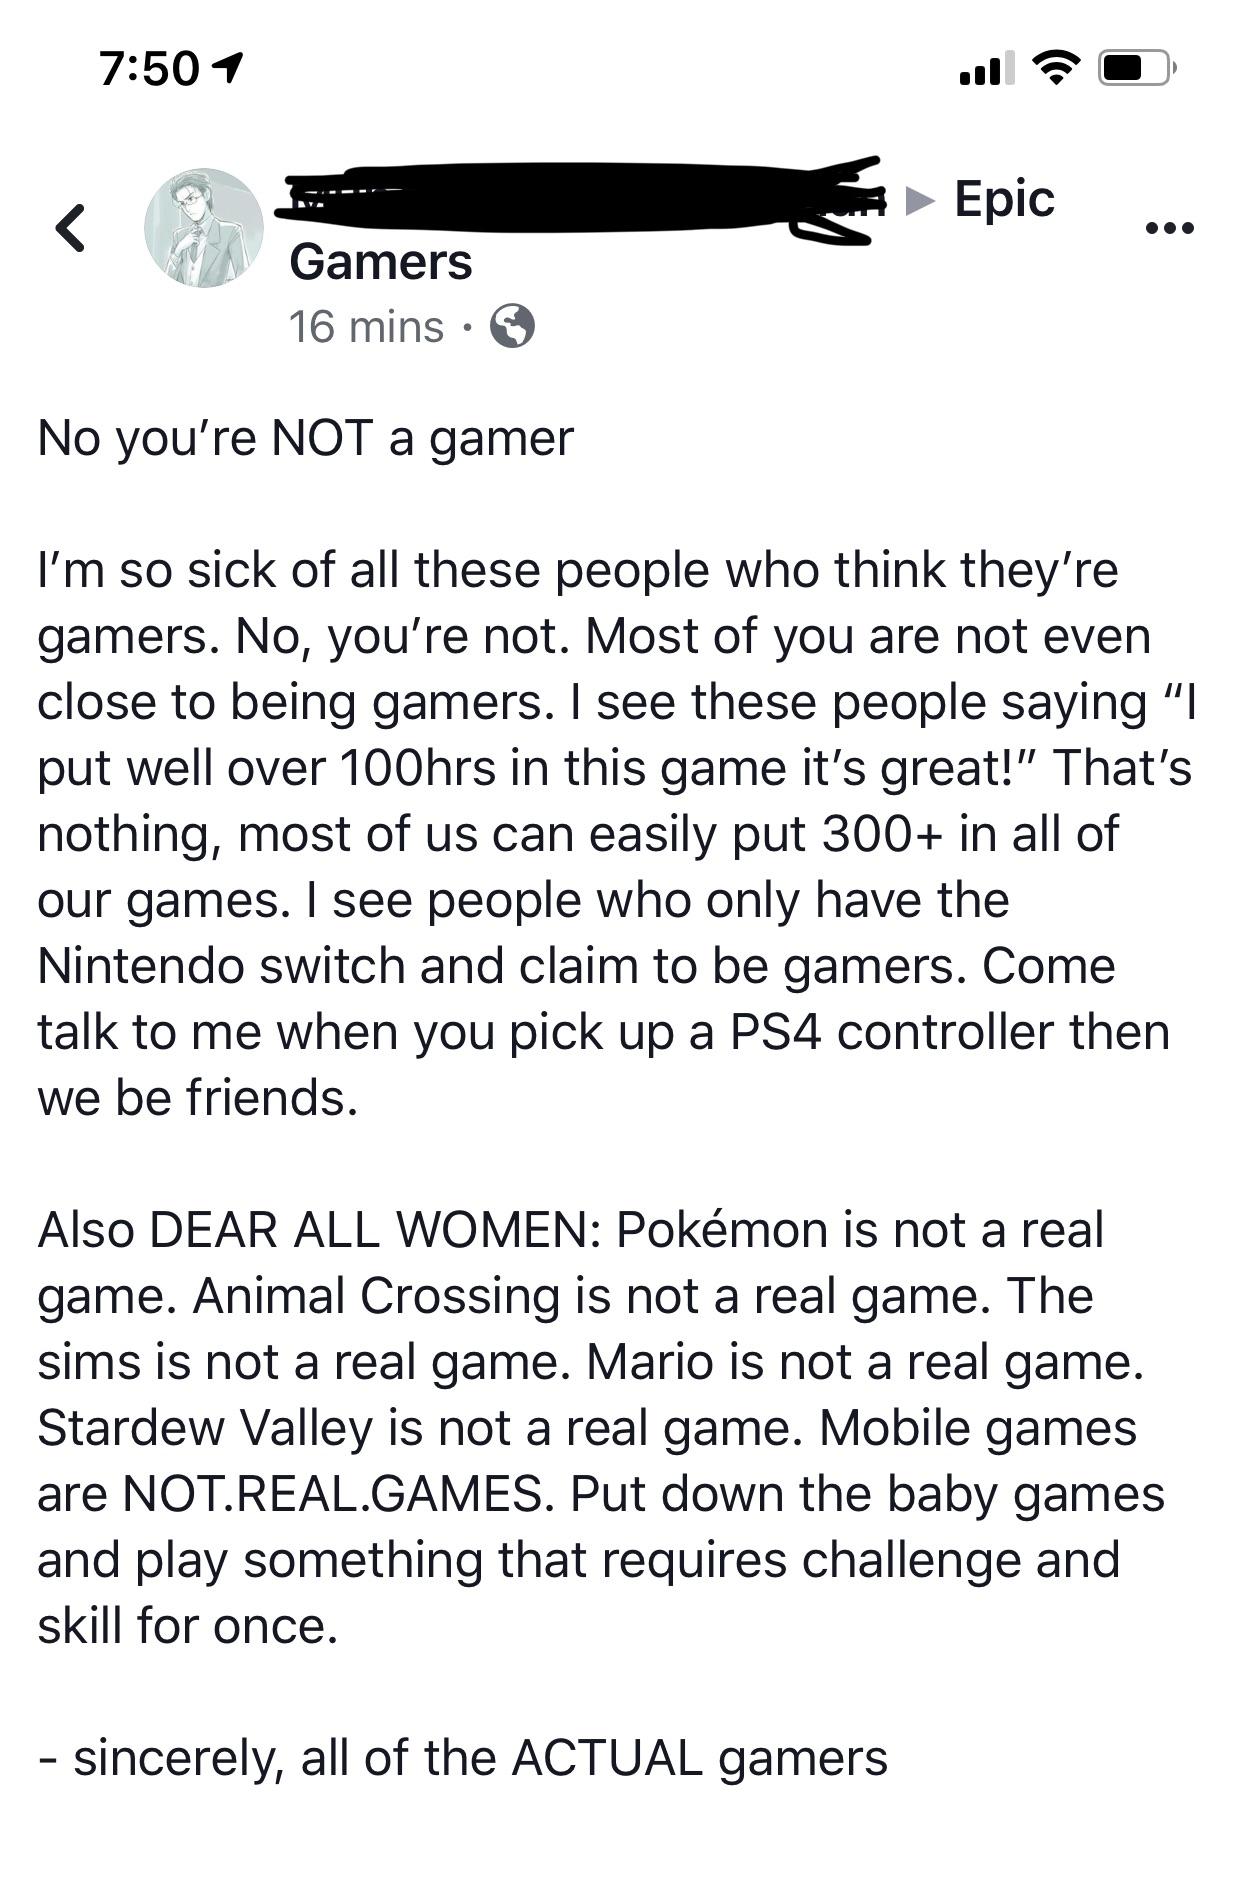 “You’re not a real gamer if you don’t play ( insert game title here)”
Gatekeeping is lame, some gamers play everything, others only play Animal Crossing, and that’s okay. Just because you don’t spend hundreds of dollars on new games every year doesn’t mean you aren’t a real gamer.